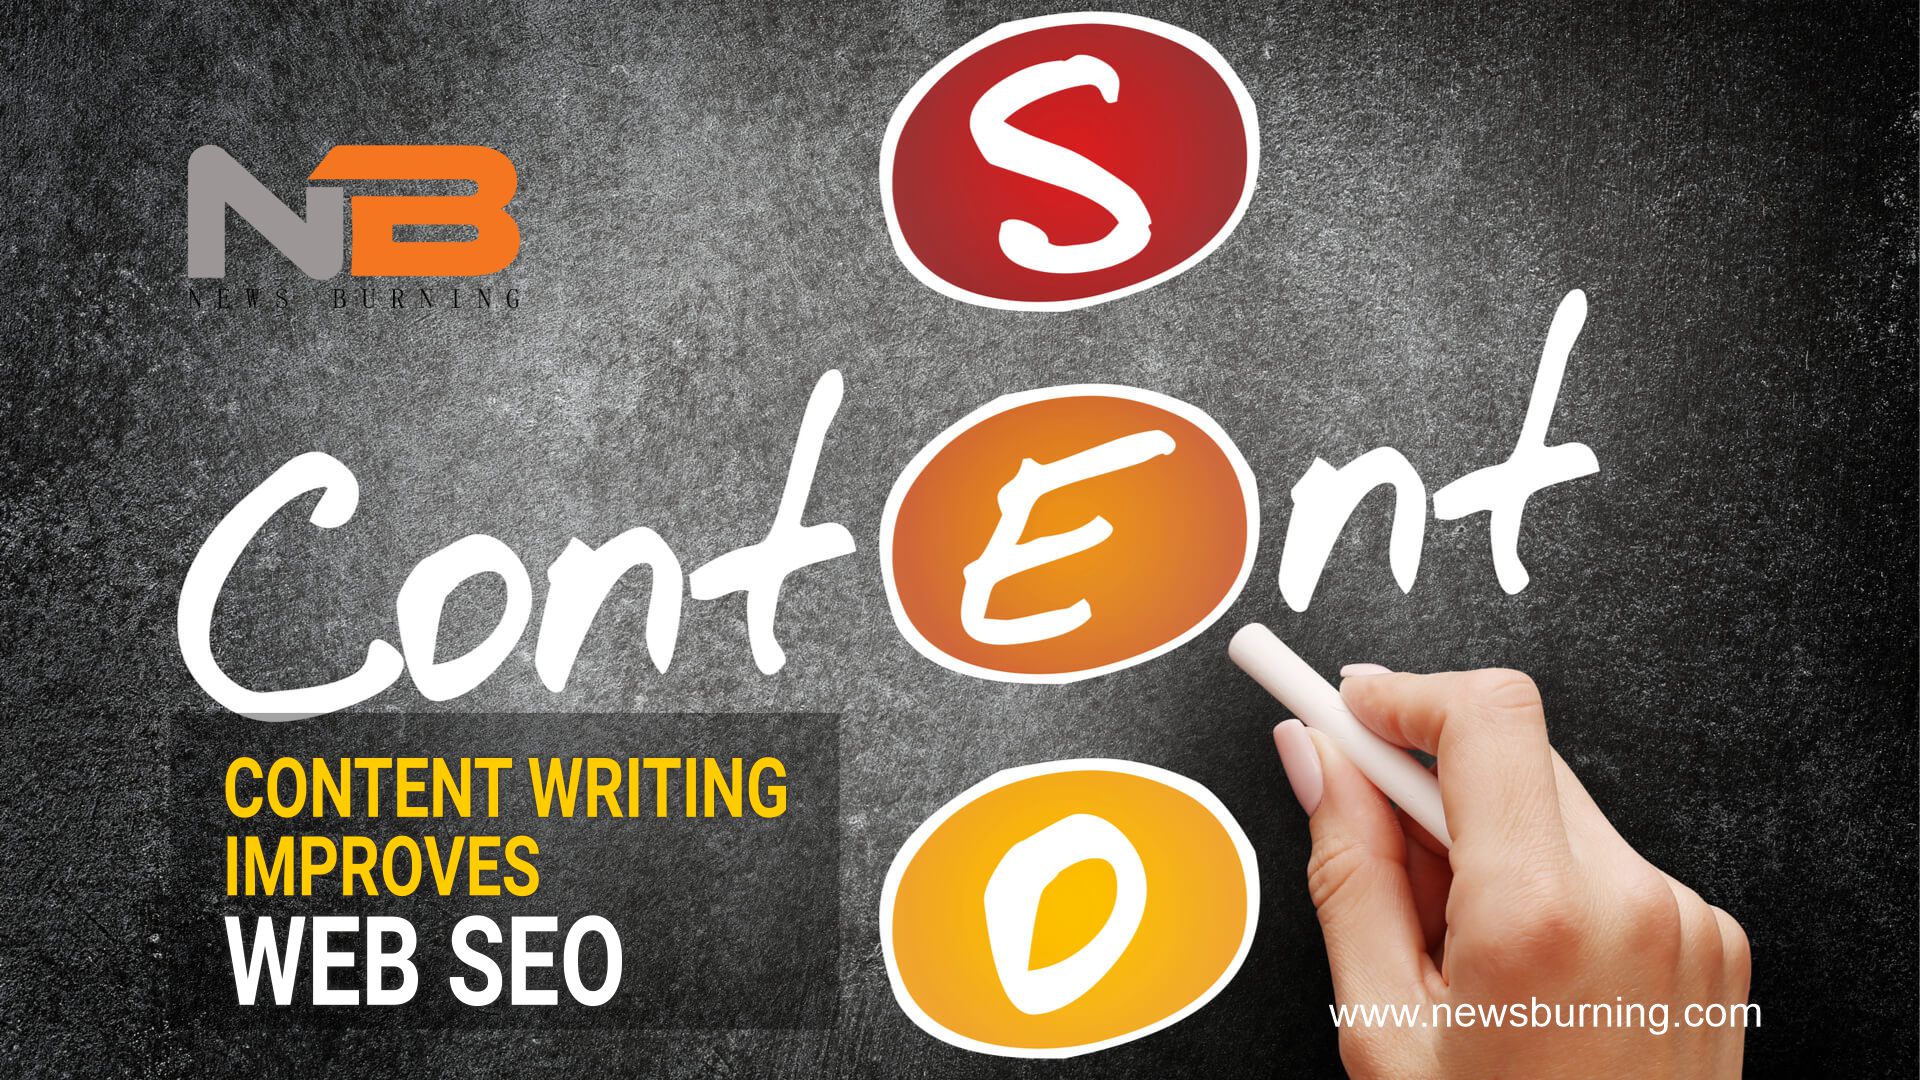 Web Seo improves with Quality Content: